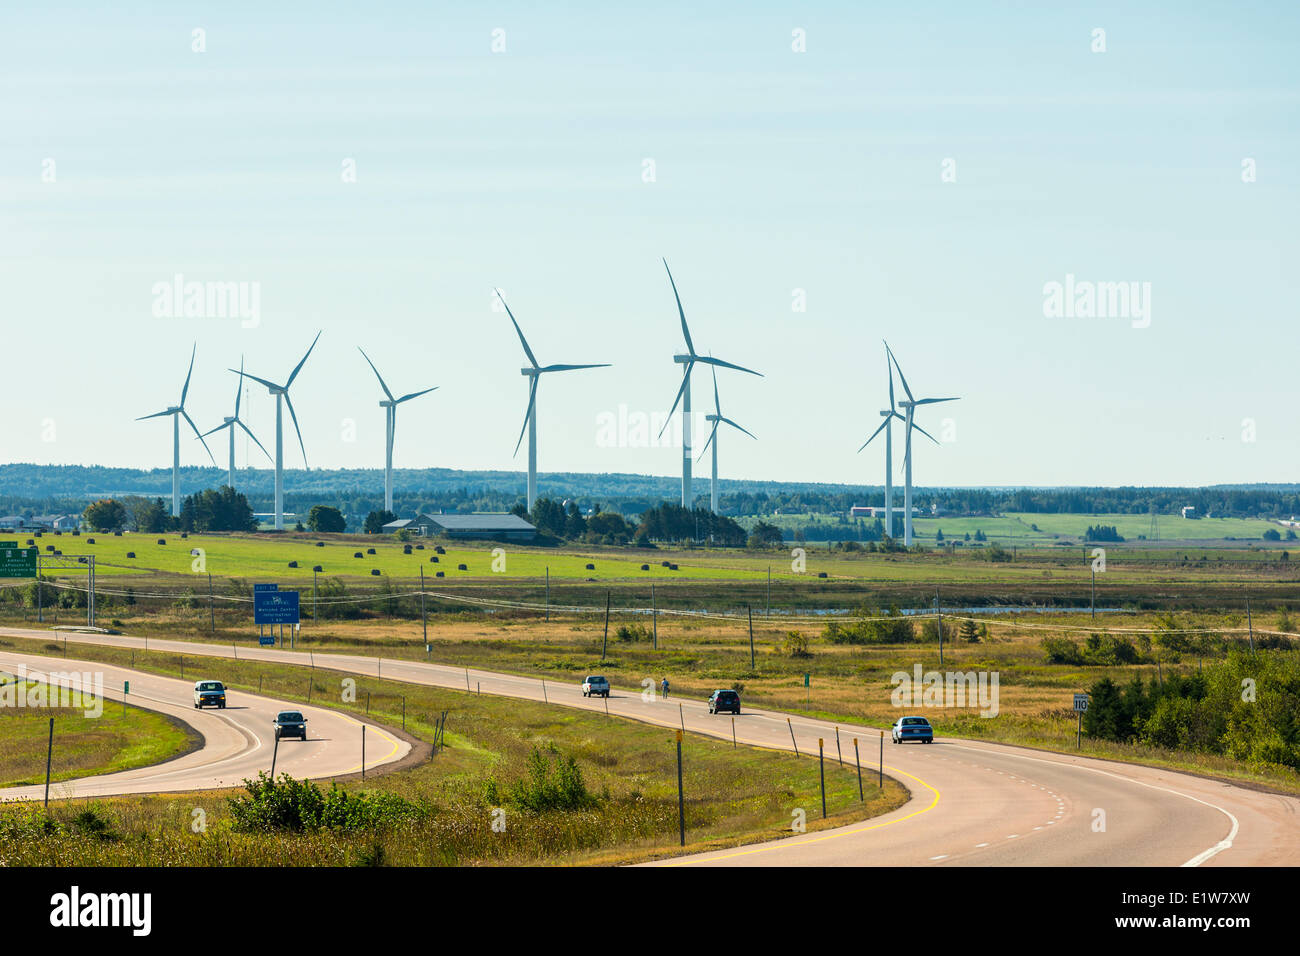 The 31.5 MW Amherst I wind farm is located in Cumberland County, Nova Scotia near the town of Amherst, Nova scotia, Canada Stock Photo